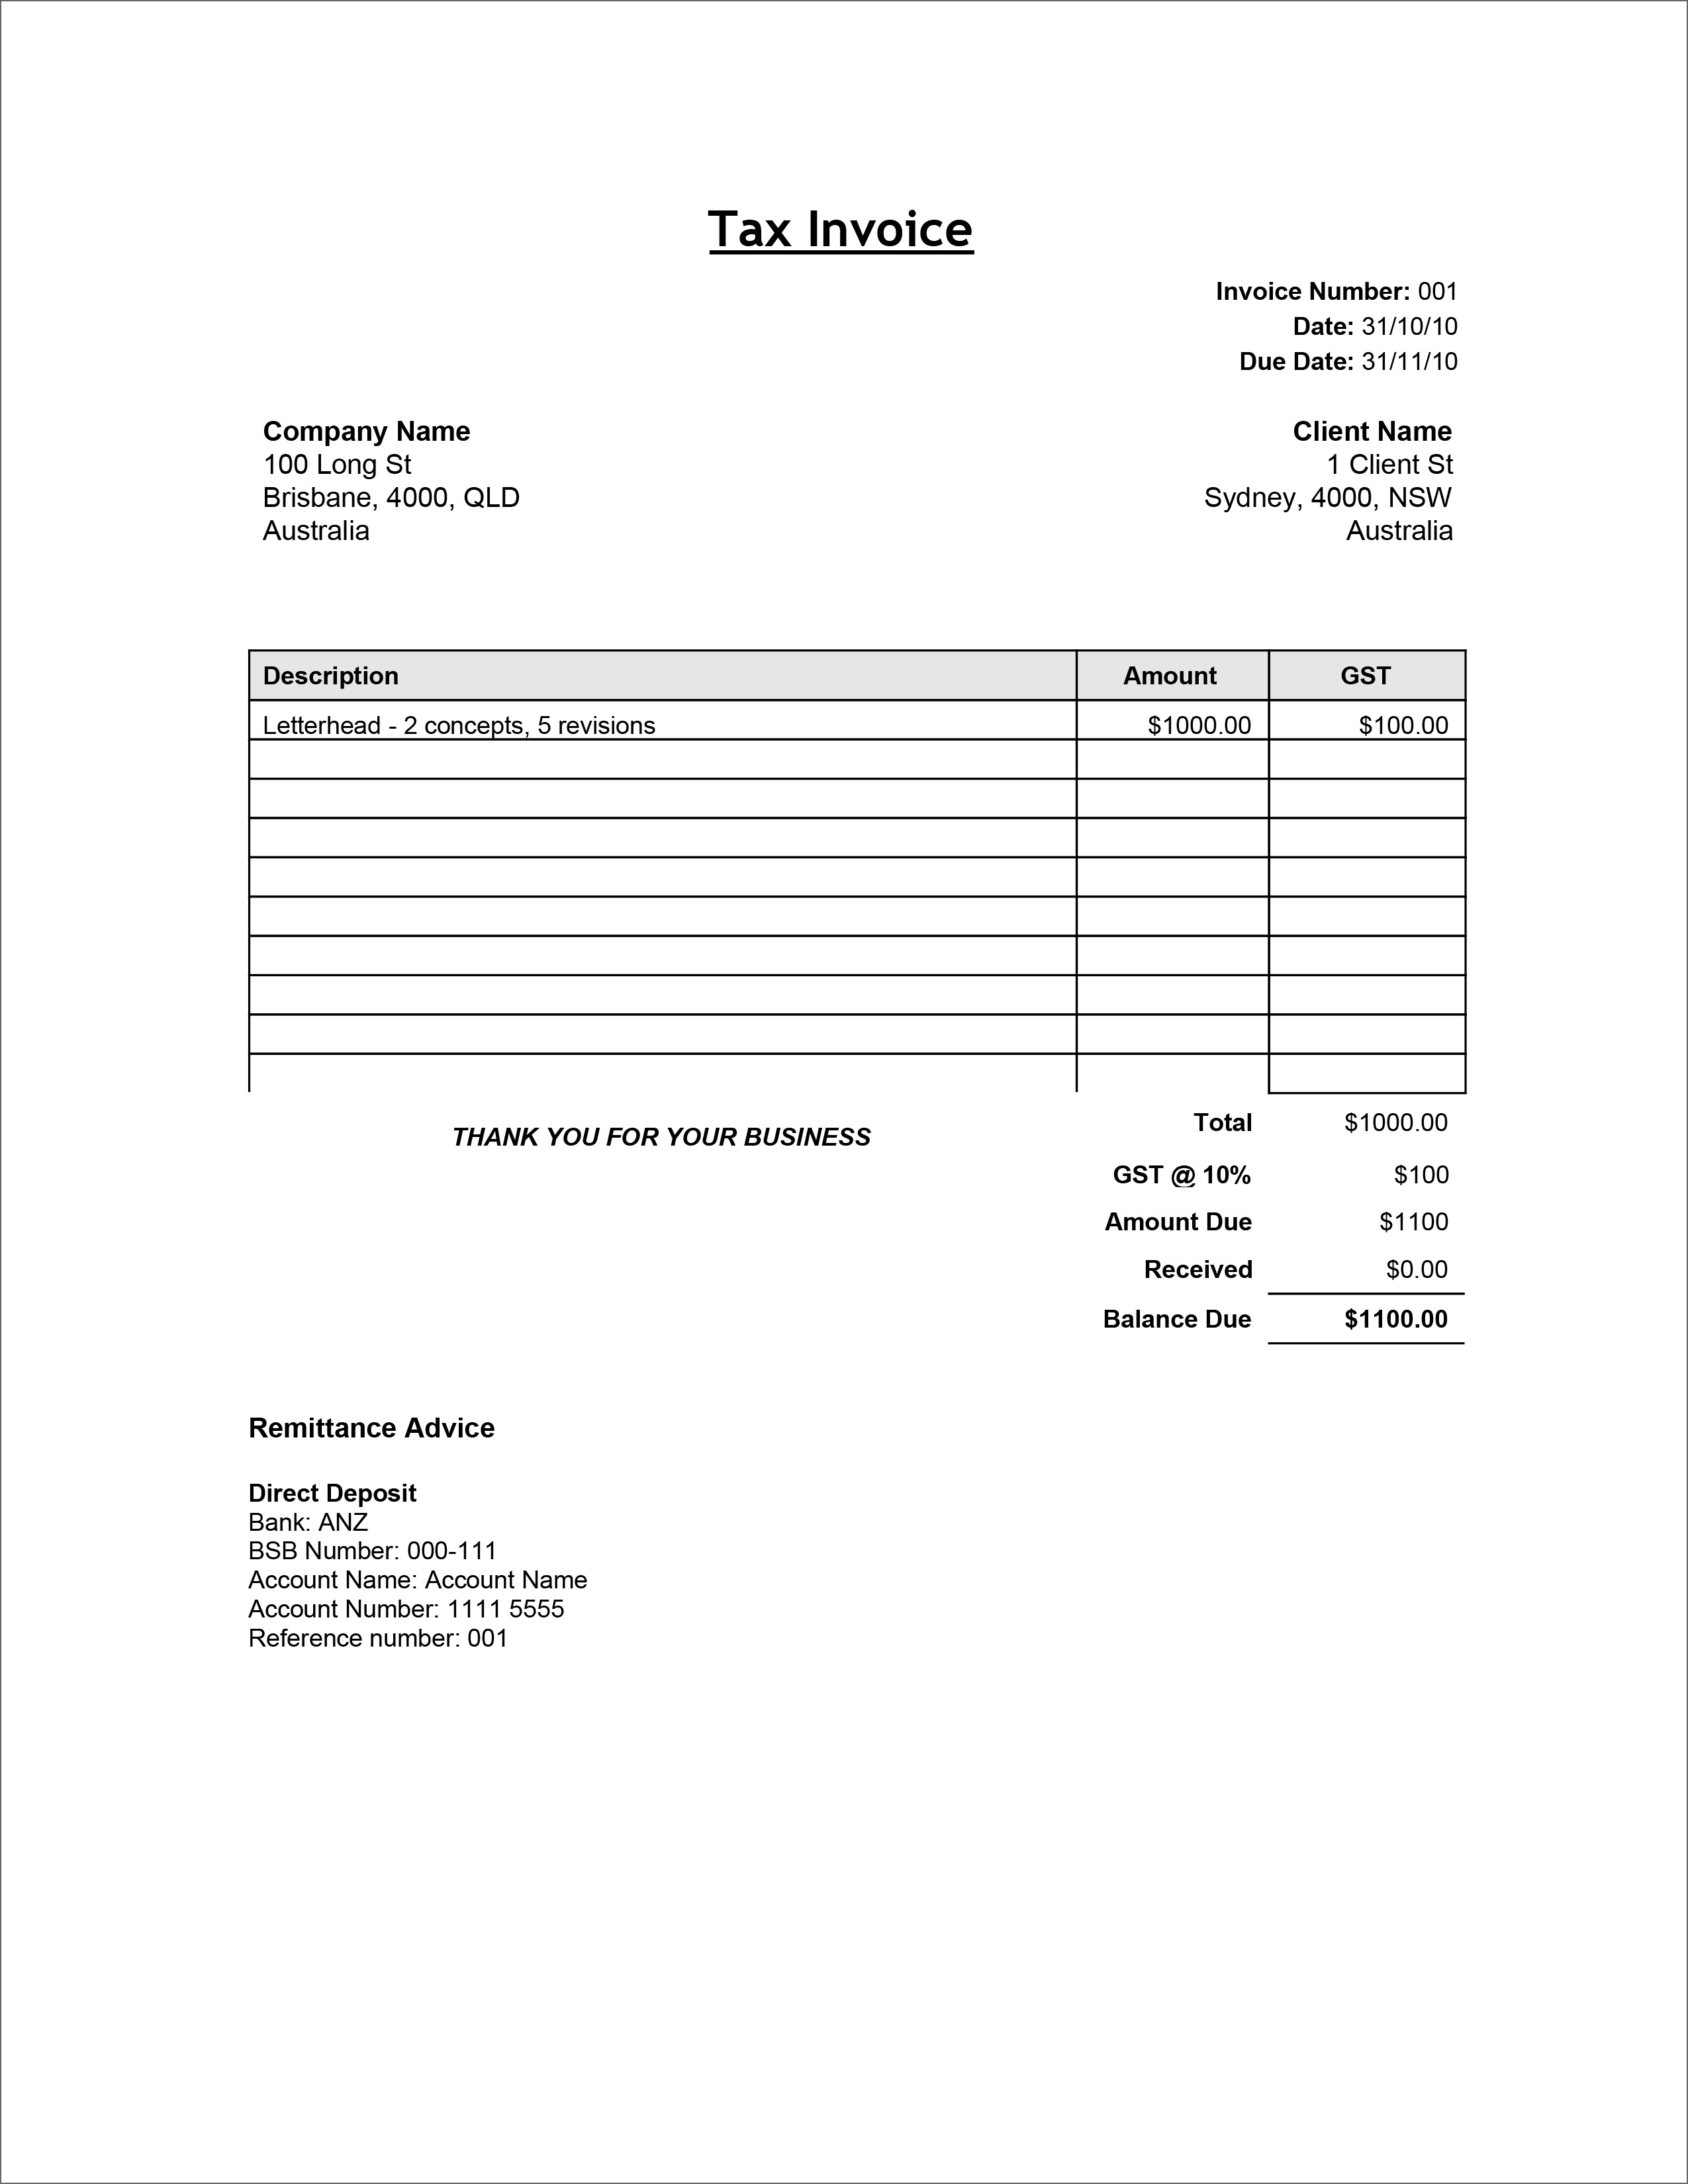 20 Free Invoice Templates In Microsoft Excel And DOCX Formats Inside Australian Invoice Template Word